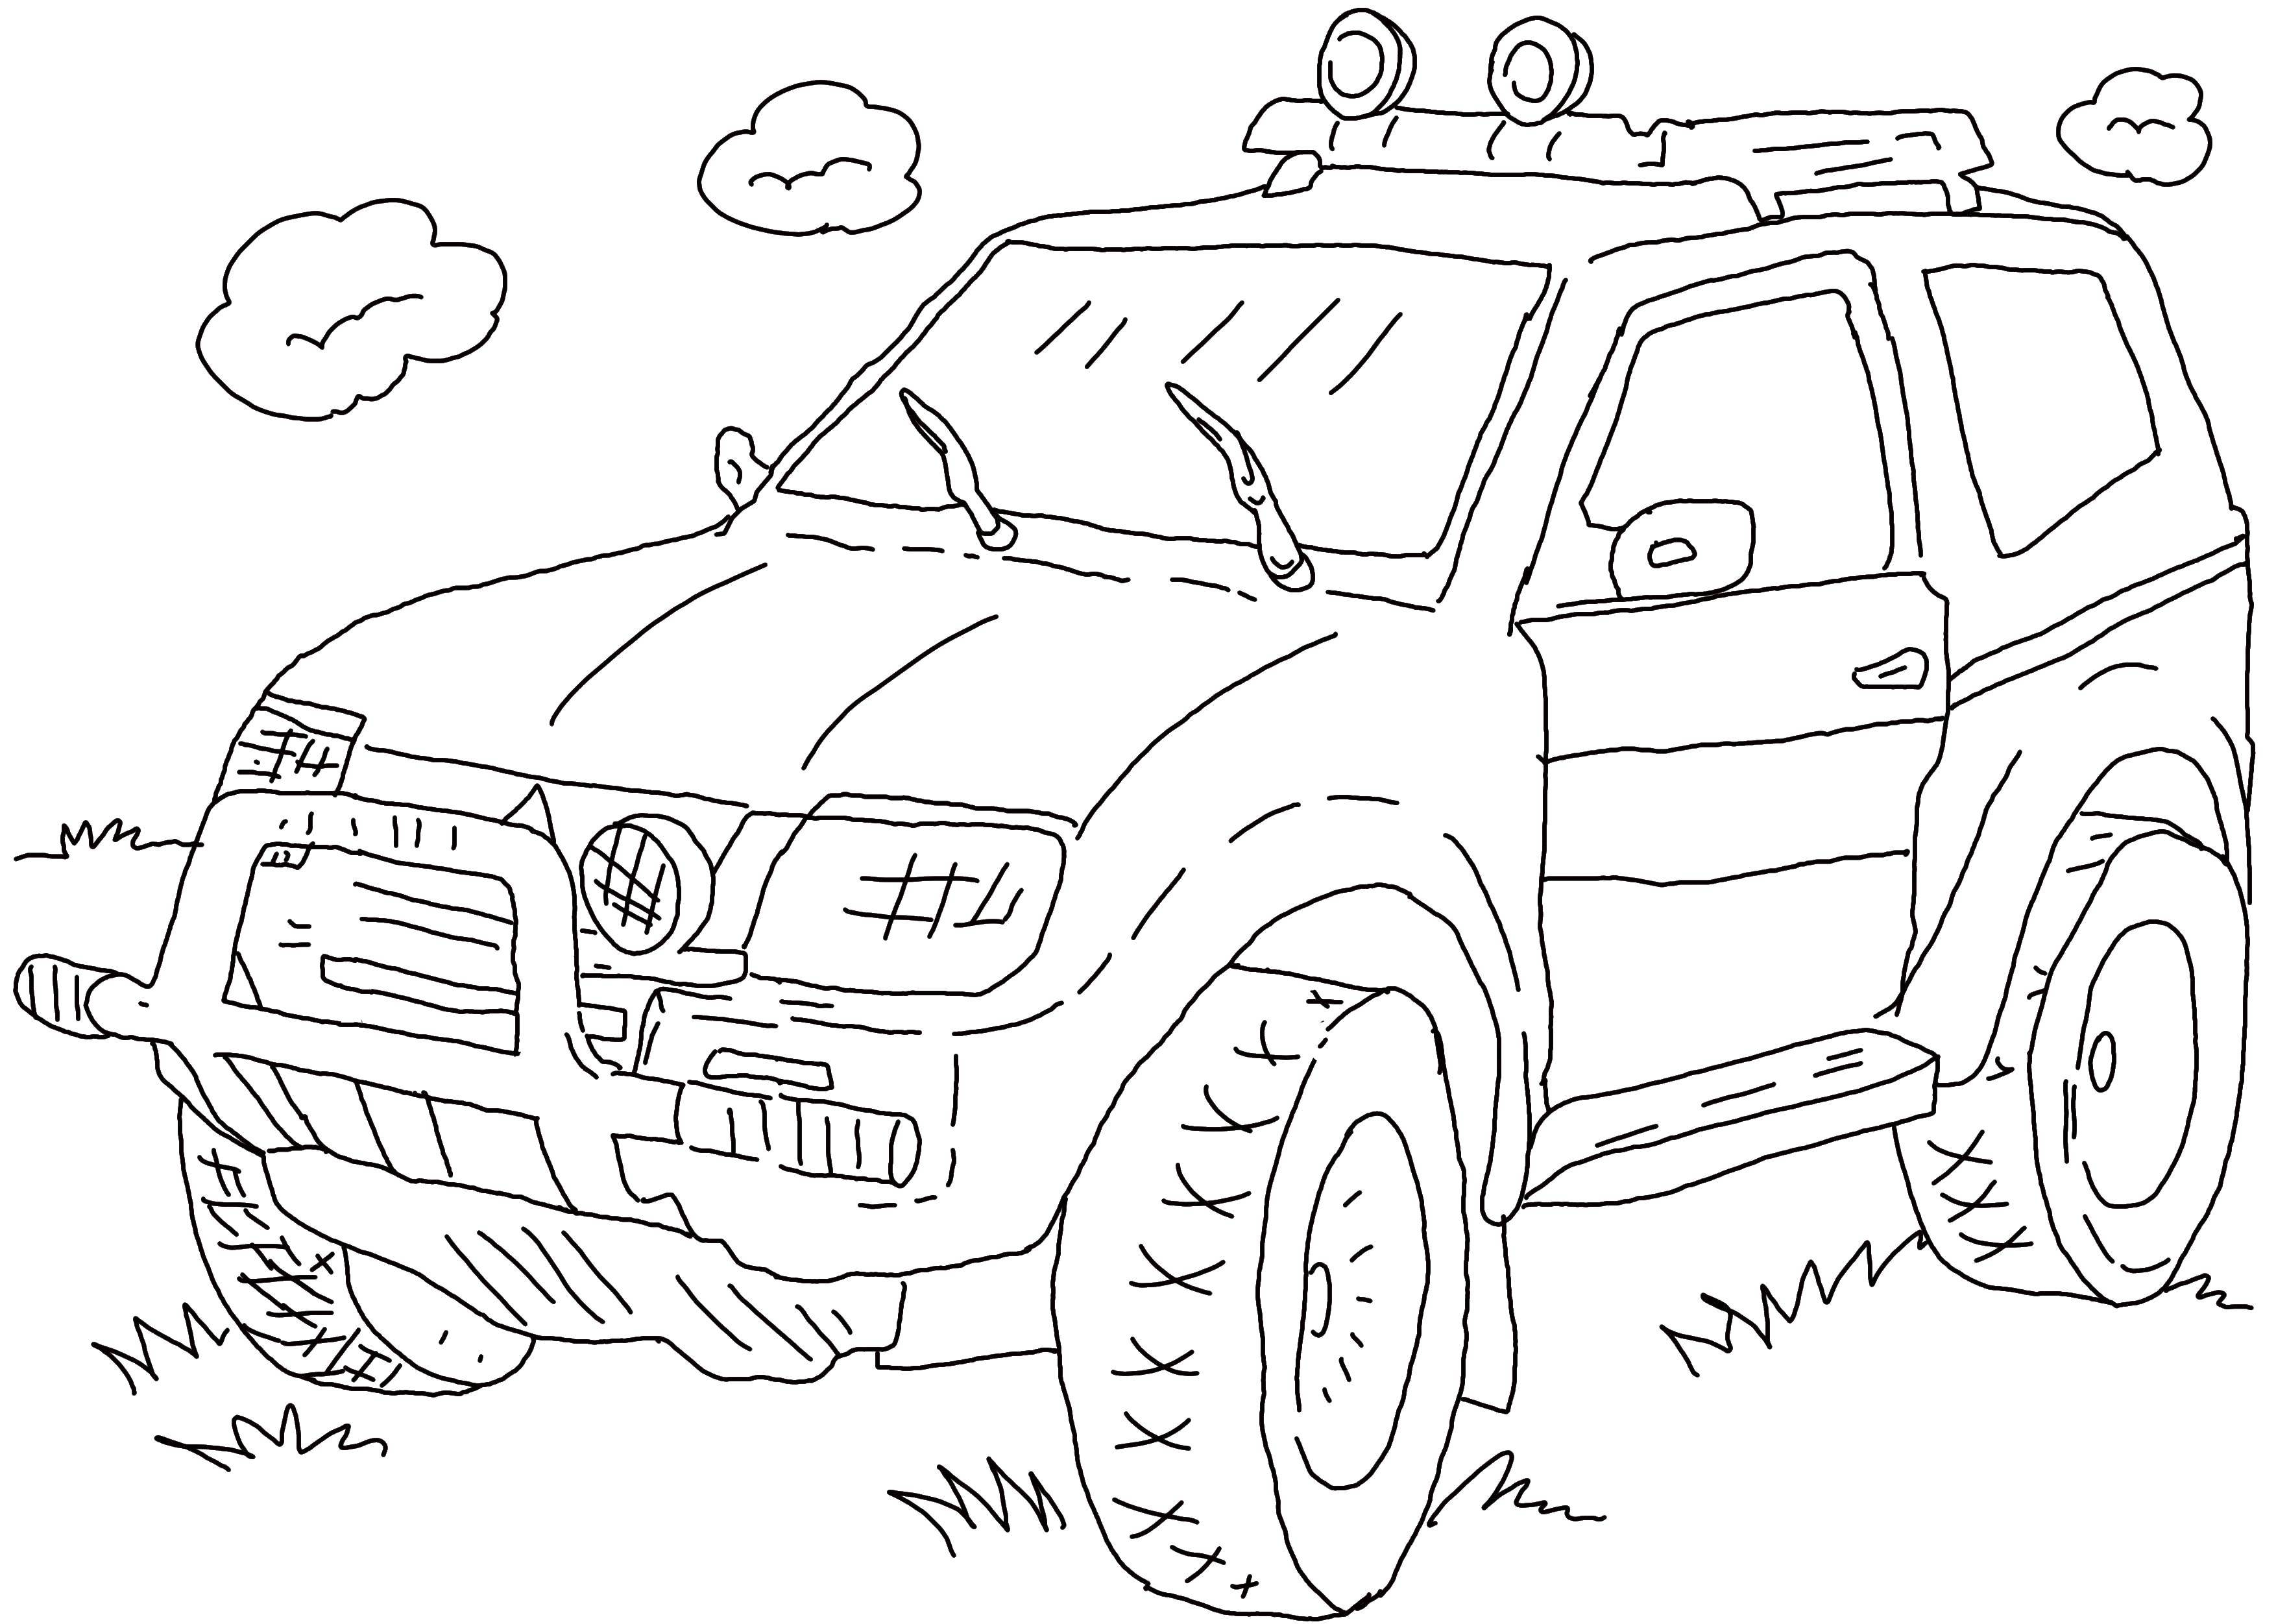 Coloring Jeep on the grass. Category machine . Tags:  jeep, wheels, car, grass.